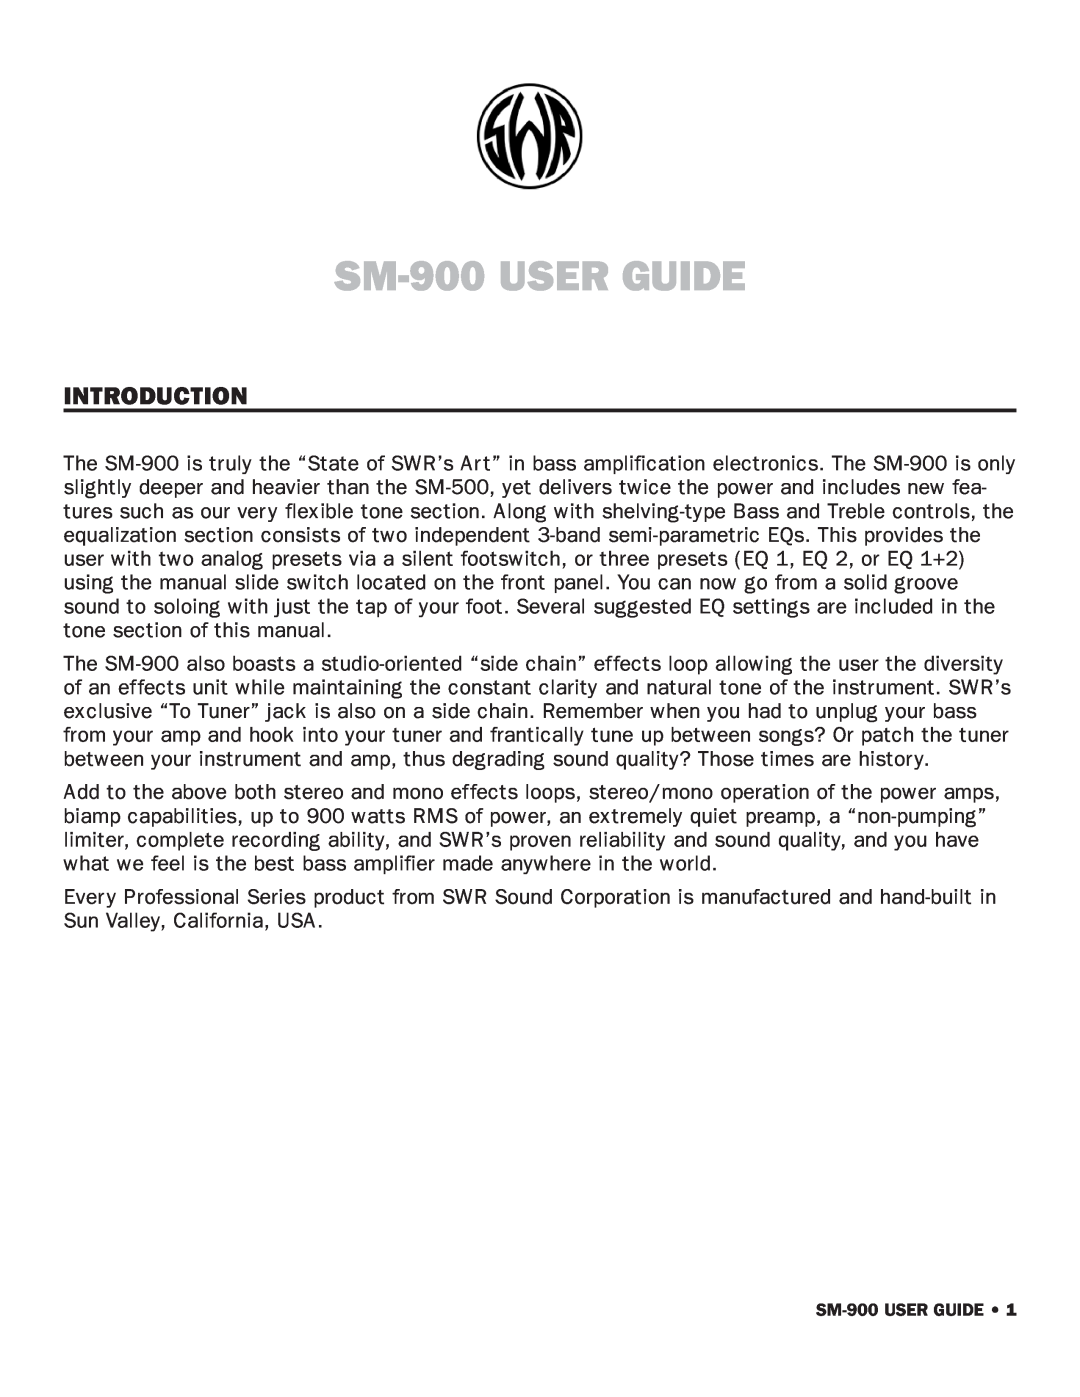 SWR Sound manual Introduction, SM-900USER GUIDE 